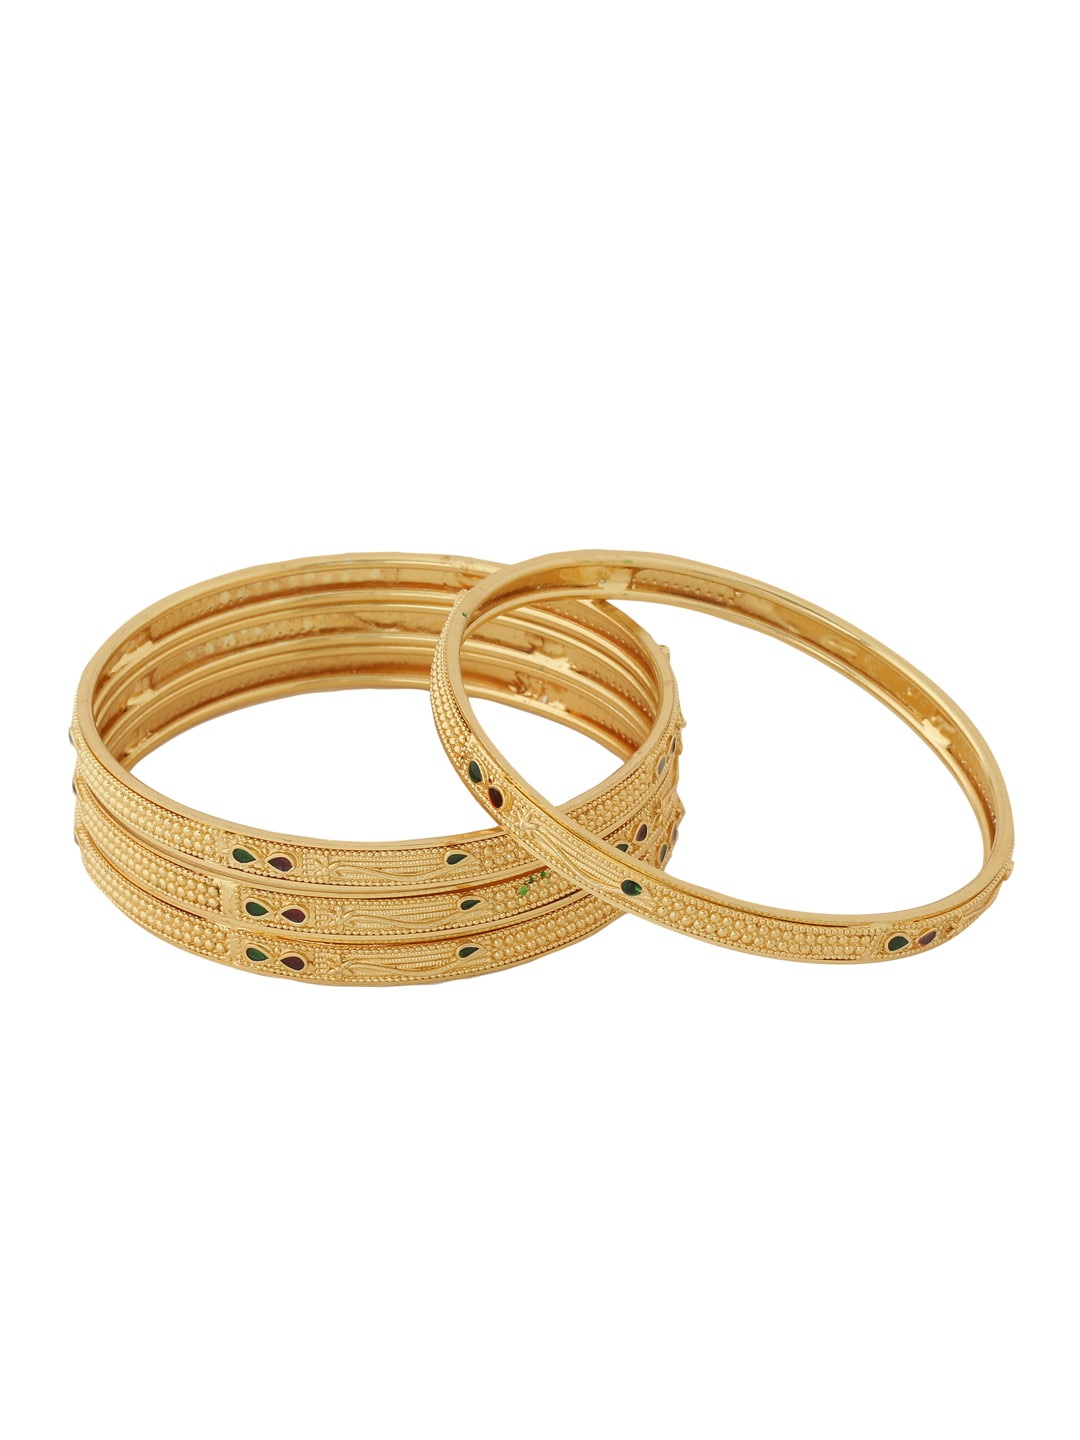 gold-plated-stone-studded-bangle-for-women-viraasi